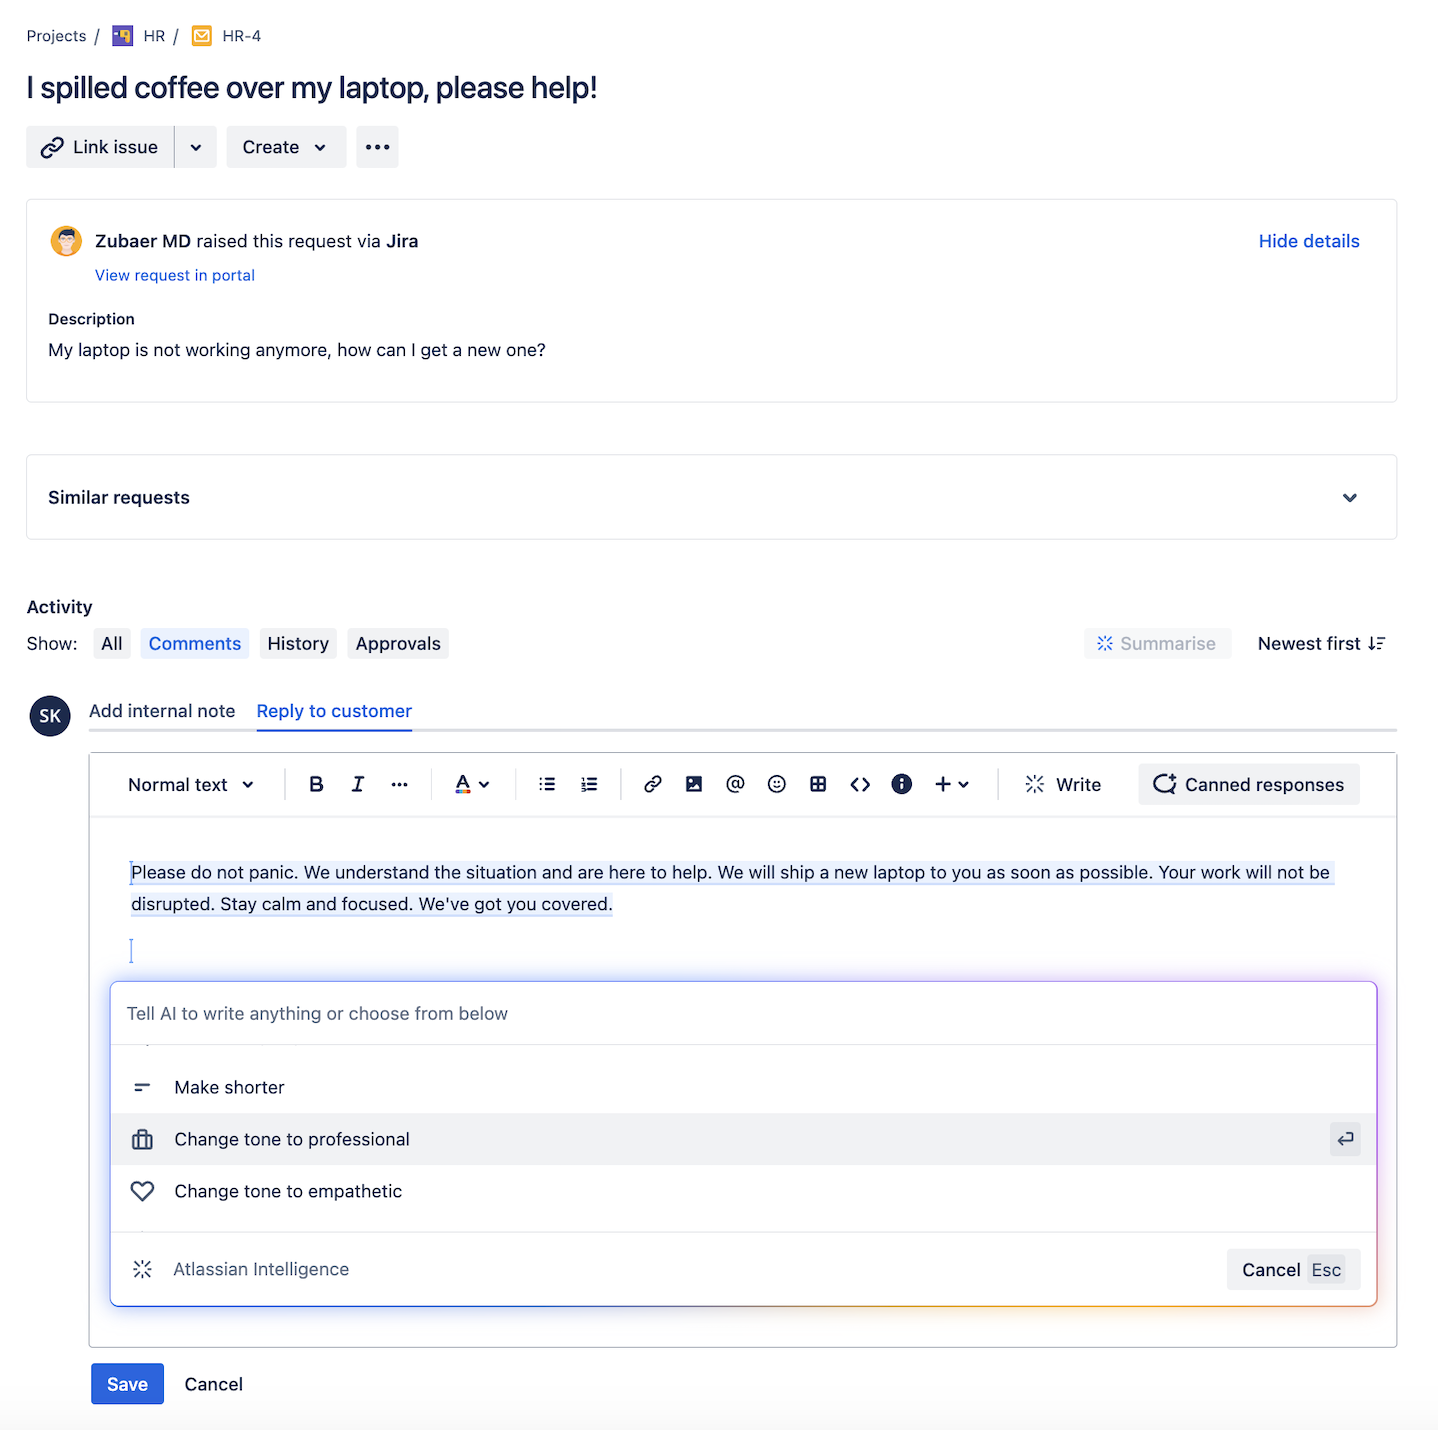 Generate or transform content using Atlassian Intelligence for a request in Jira Service Management.